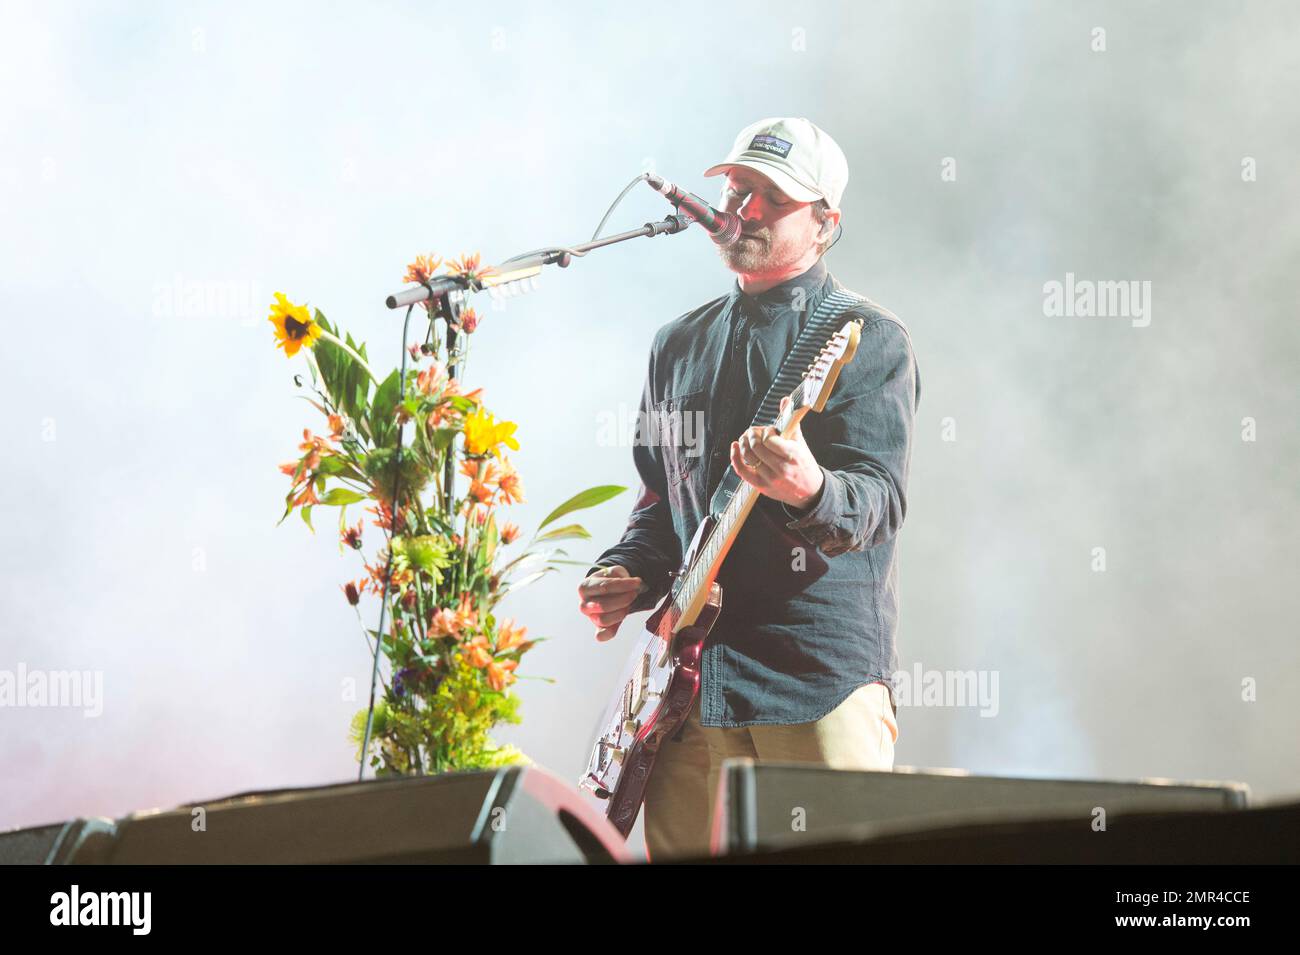 Jesse Lacey of Brand New performs at the Voodoo Music Experience